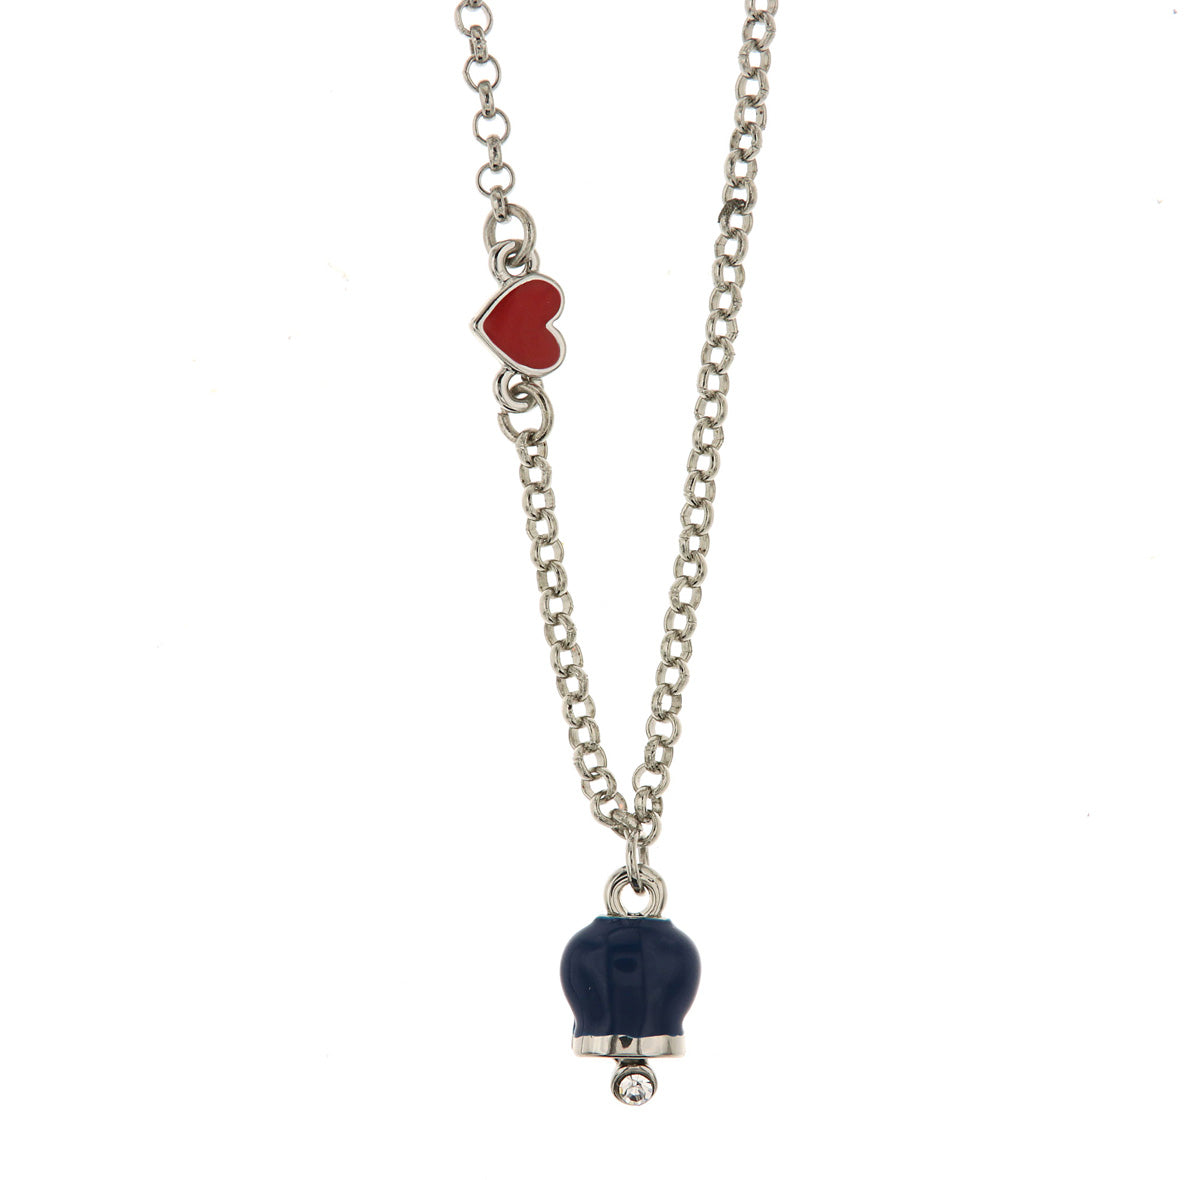 Metal necklace with red heart and blue pendant charming bell, embellished with light point